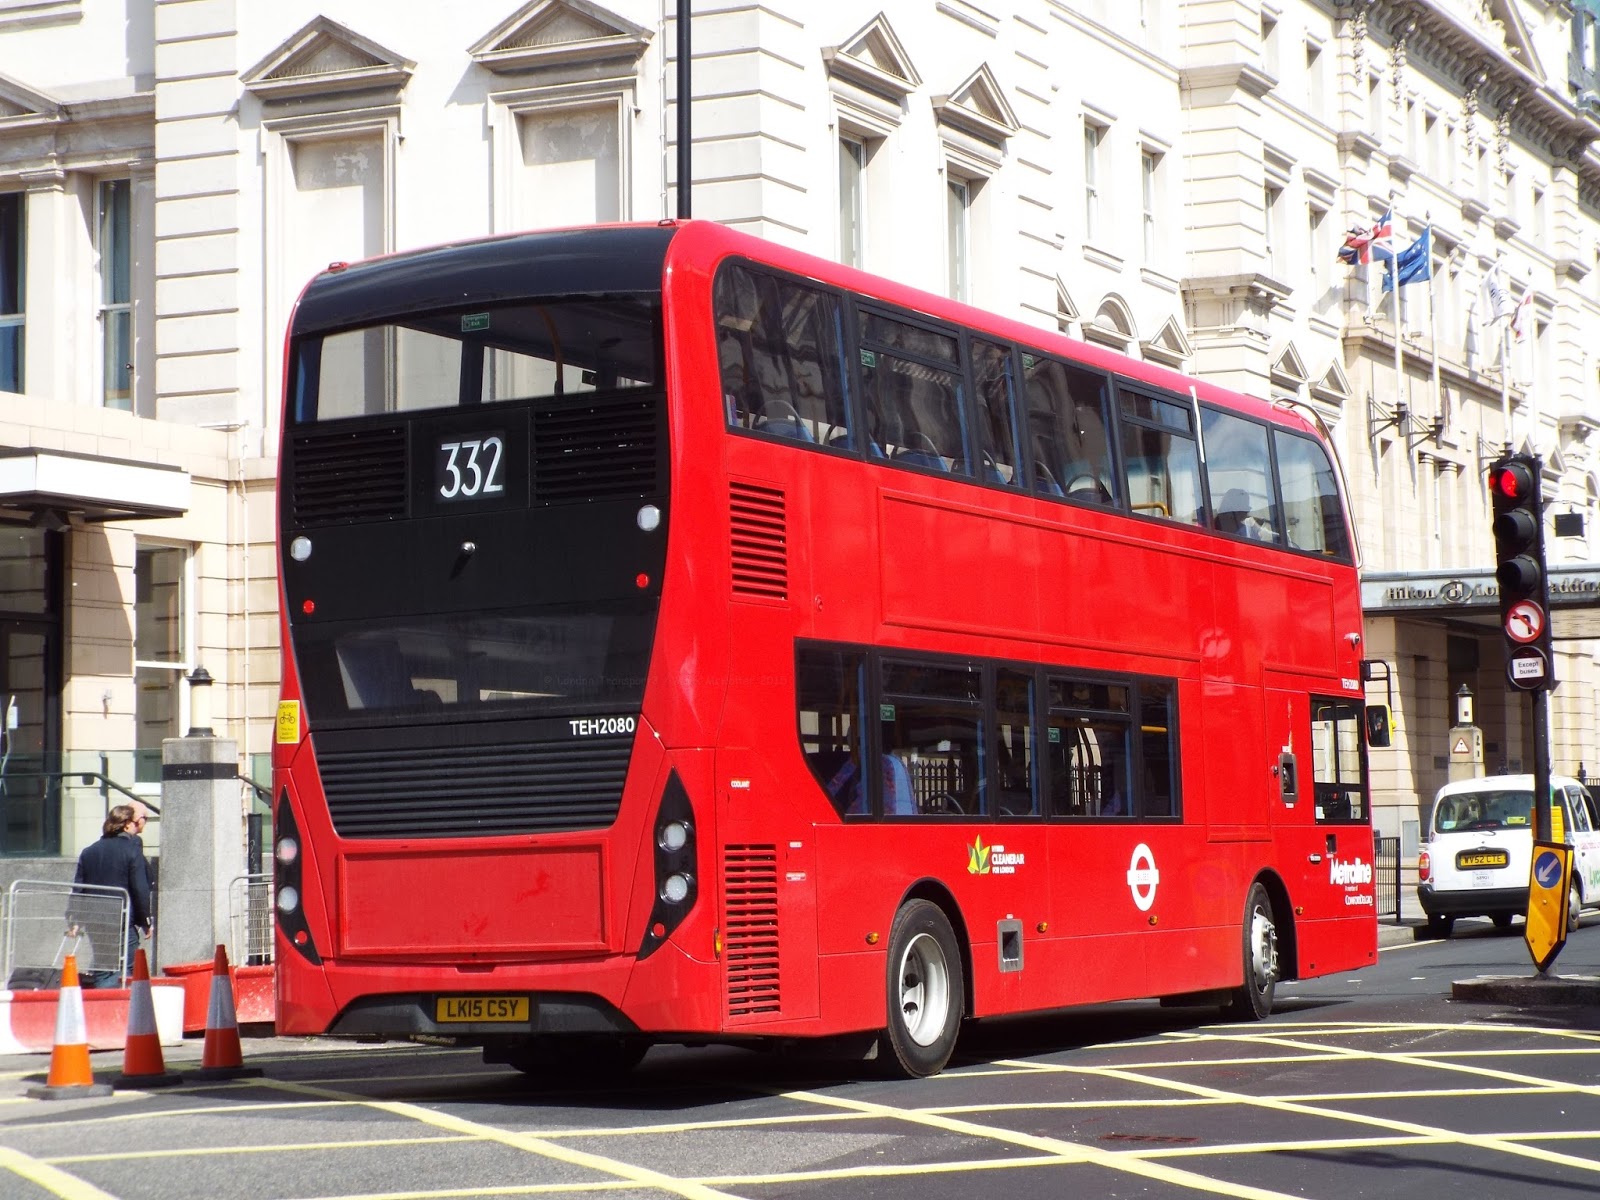 londontransport3-route-332-receives-new-buses